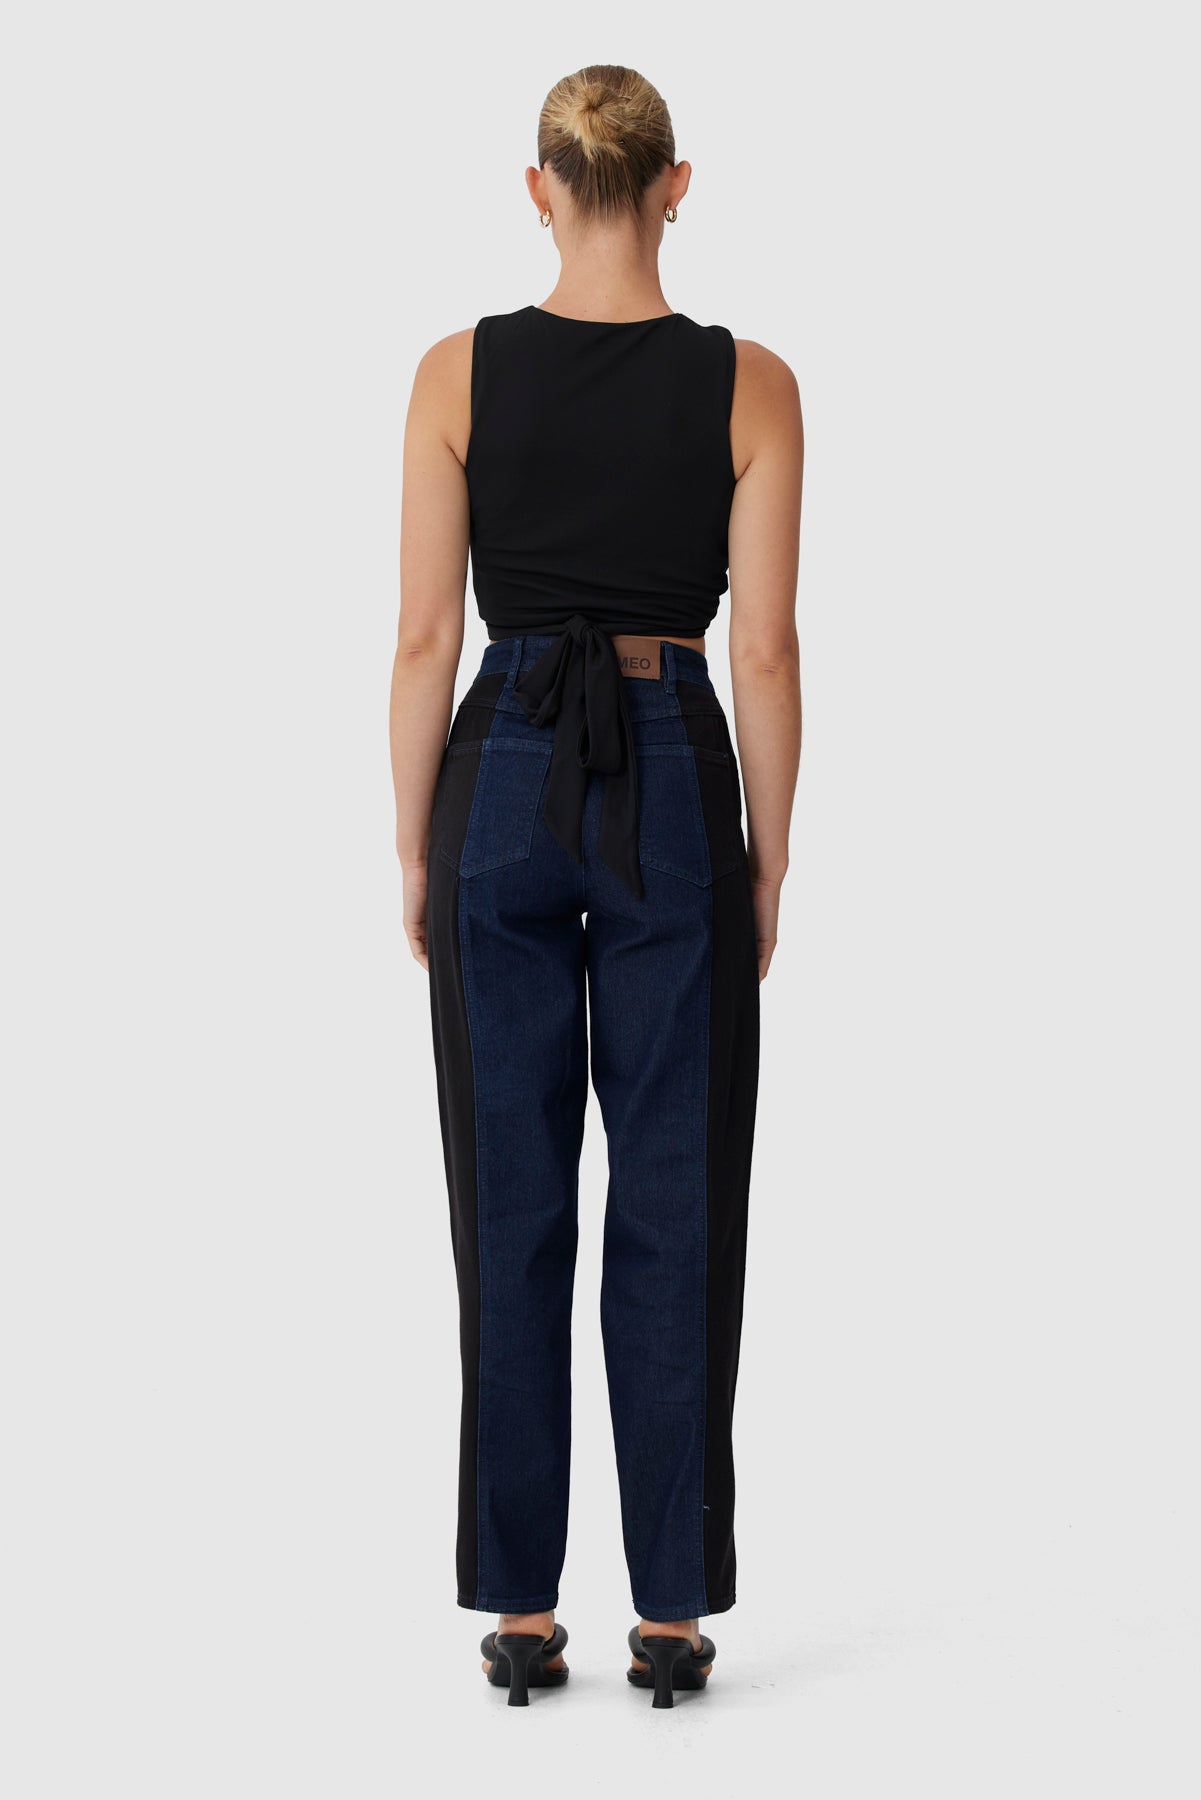 C/MEO Collective - Overpass Jeans - Indigo And Black